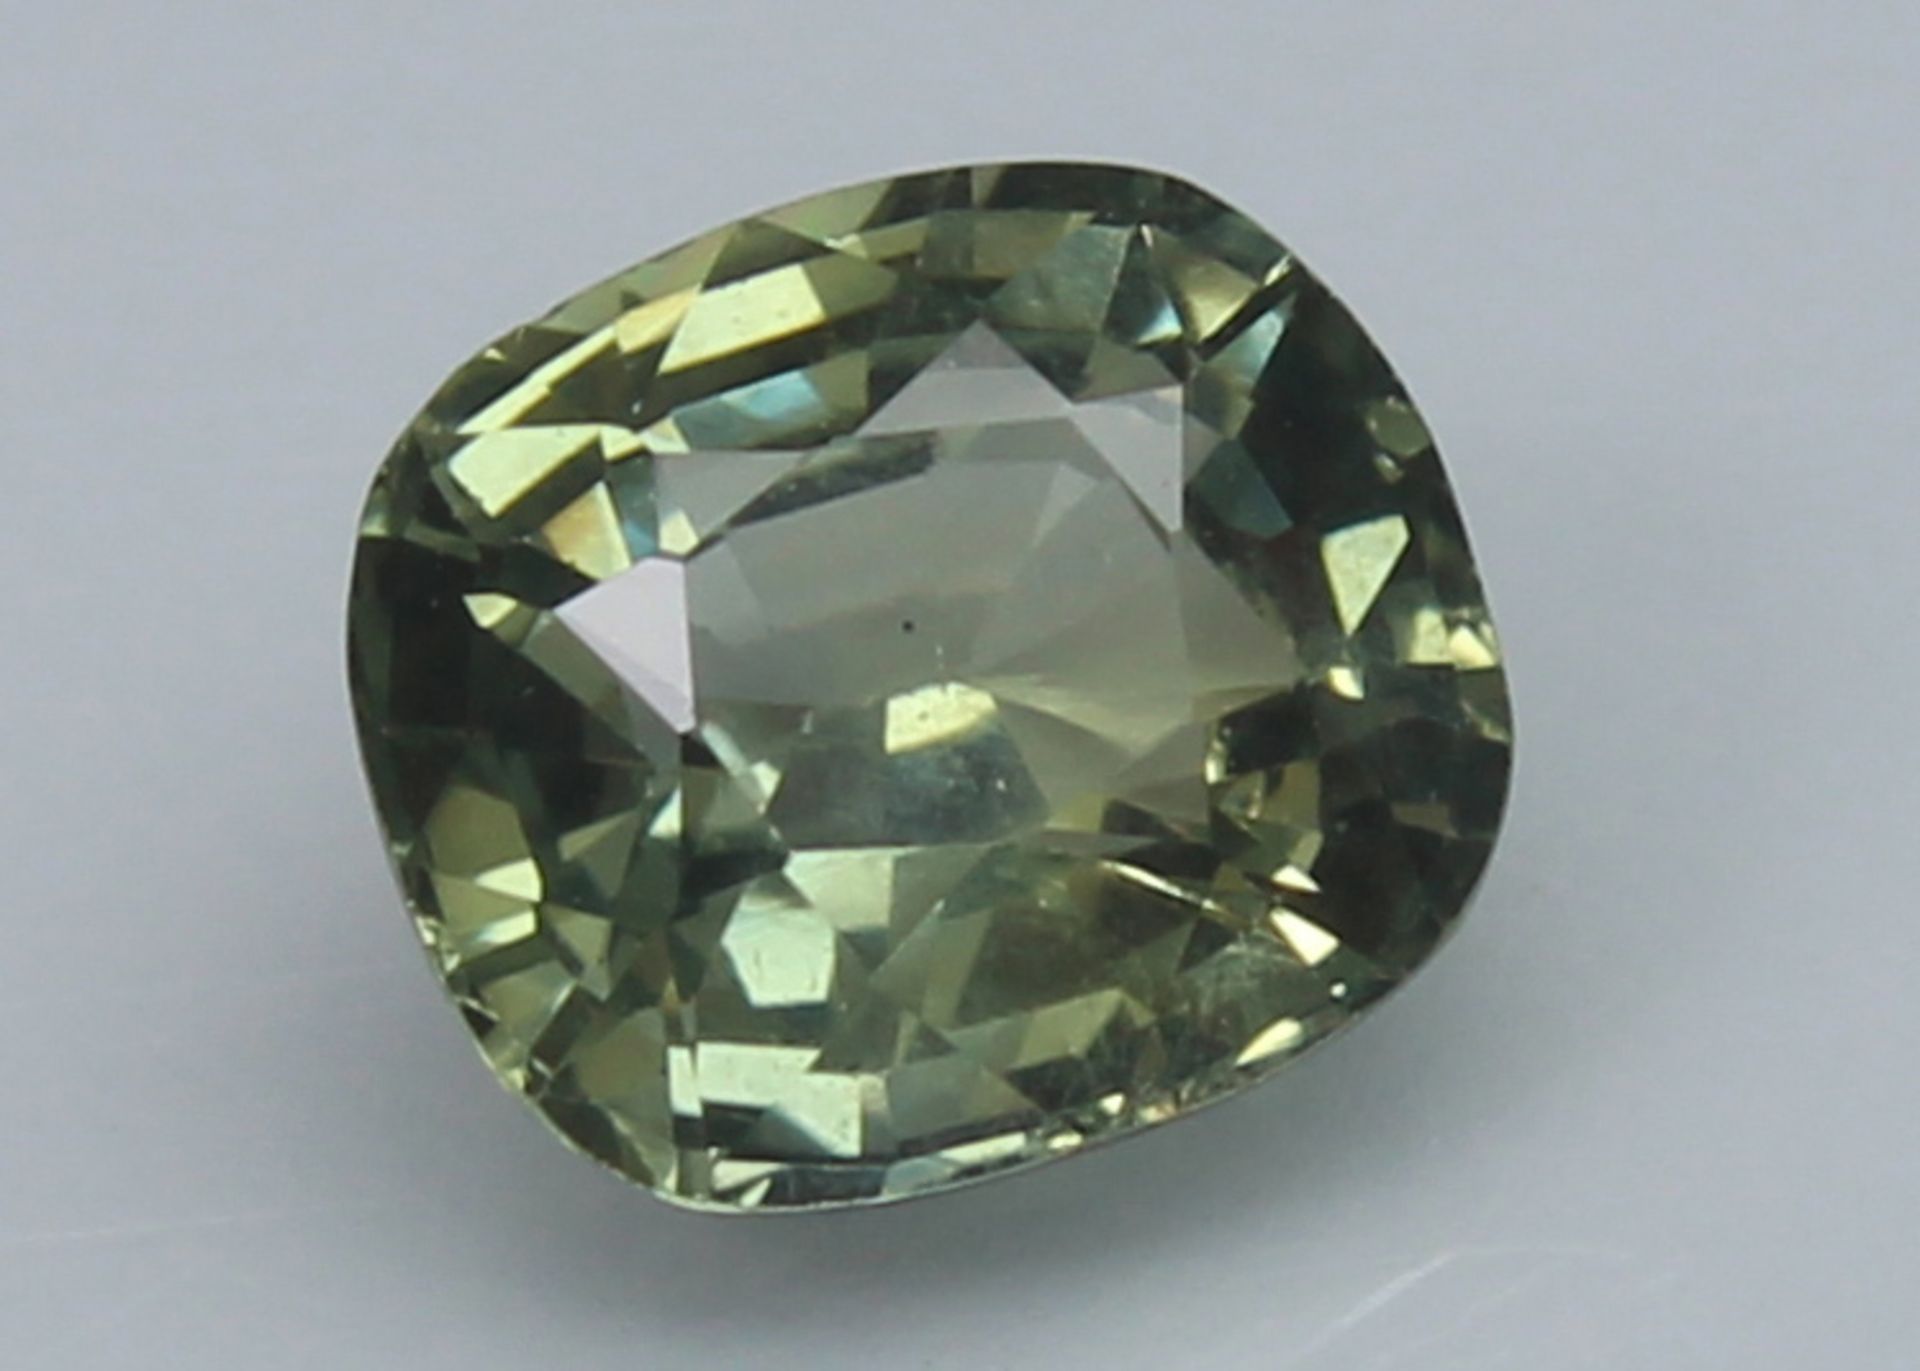 Green Sapphire, 1.08 Ct - unheated - Image 3 of 5